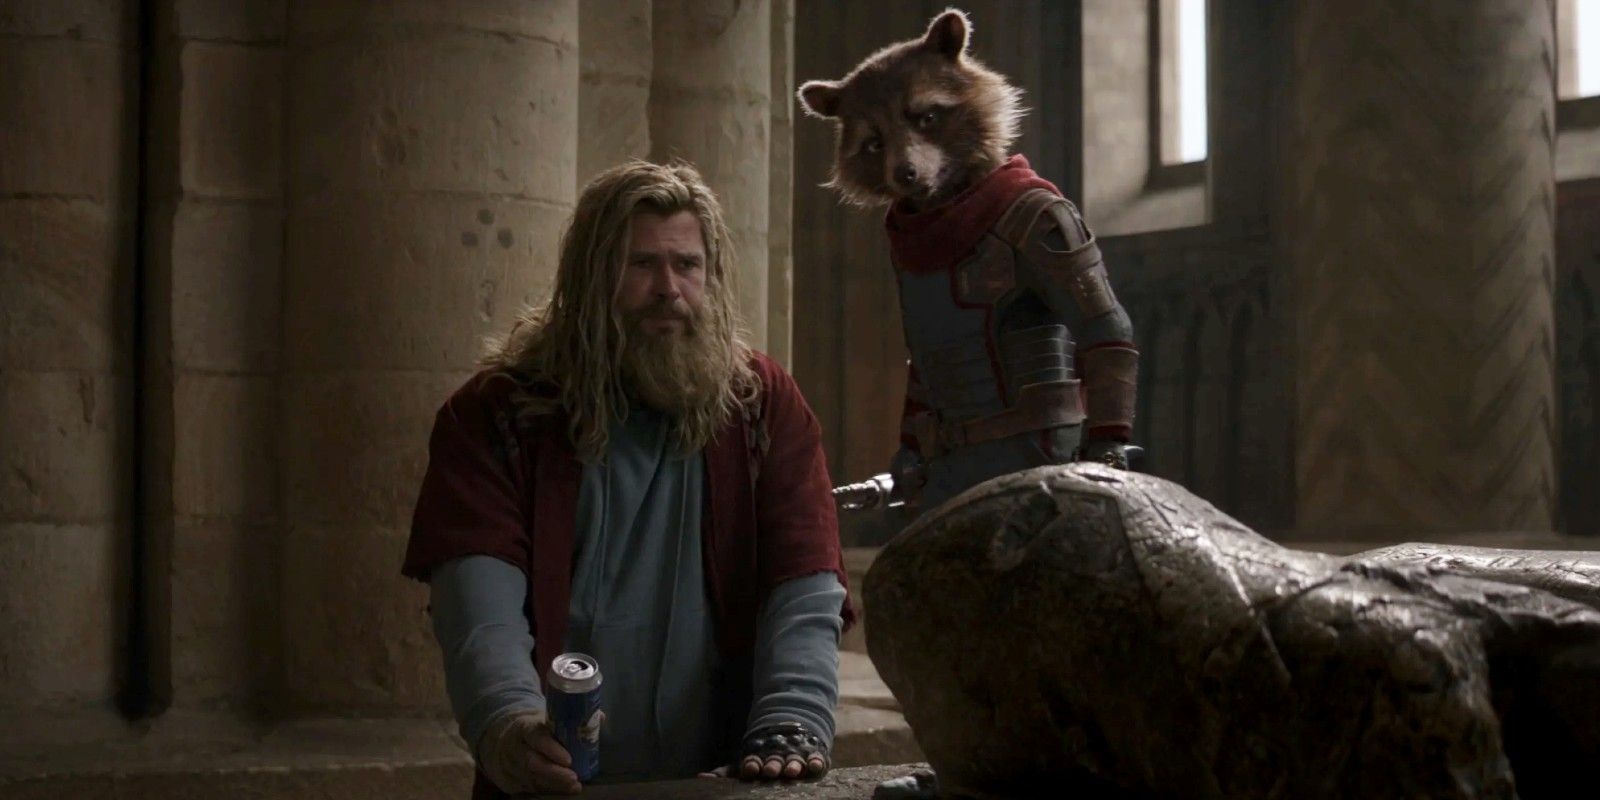 Avengers: Endgame - Fat Thor and Rocket Raccoon in Asgard